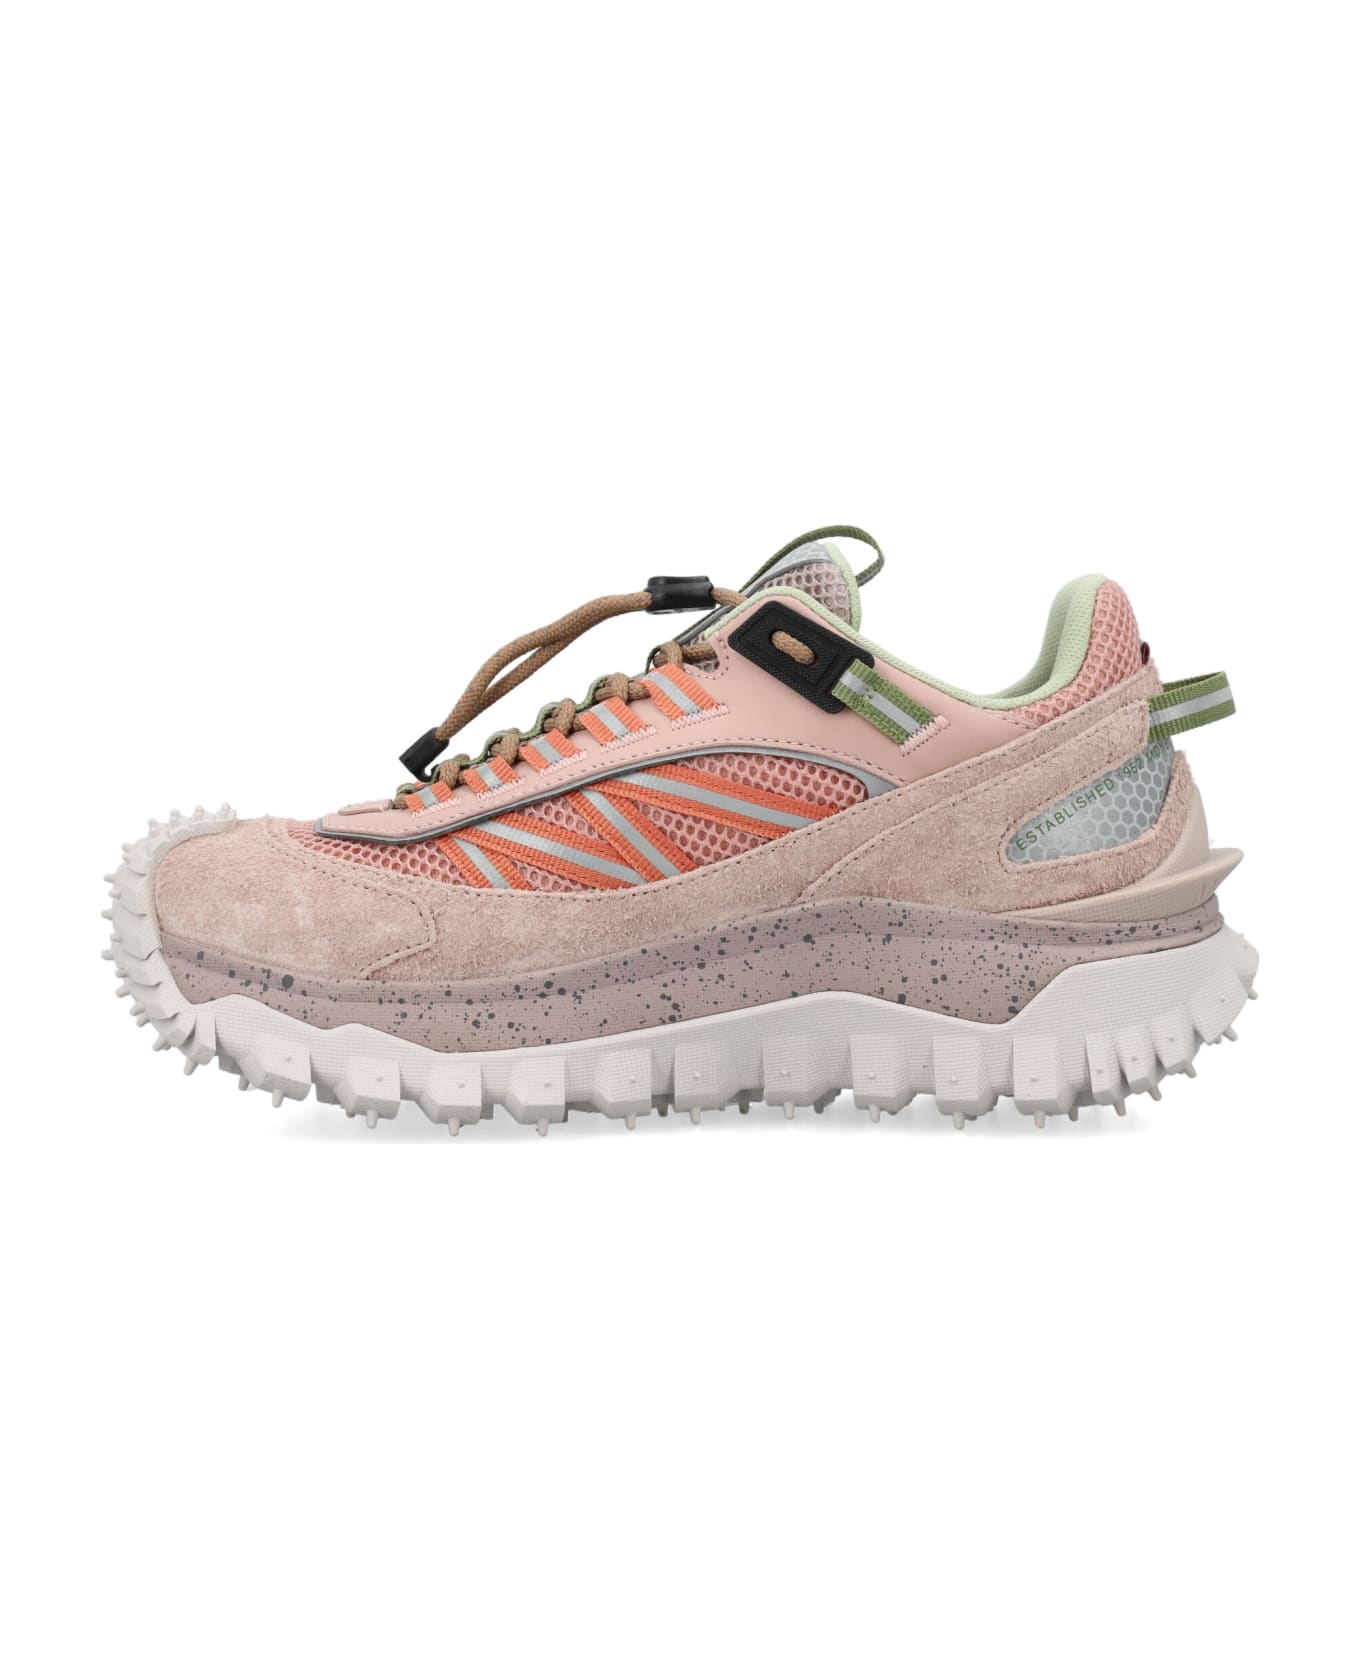 Moncler Trailgrip Trainers - PINK スニーカー